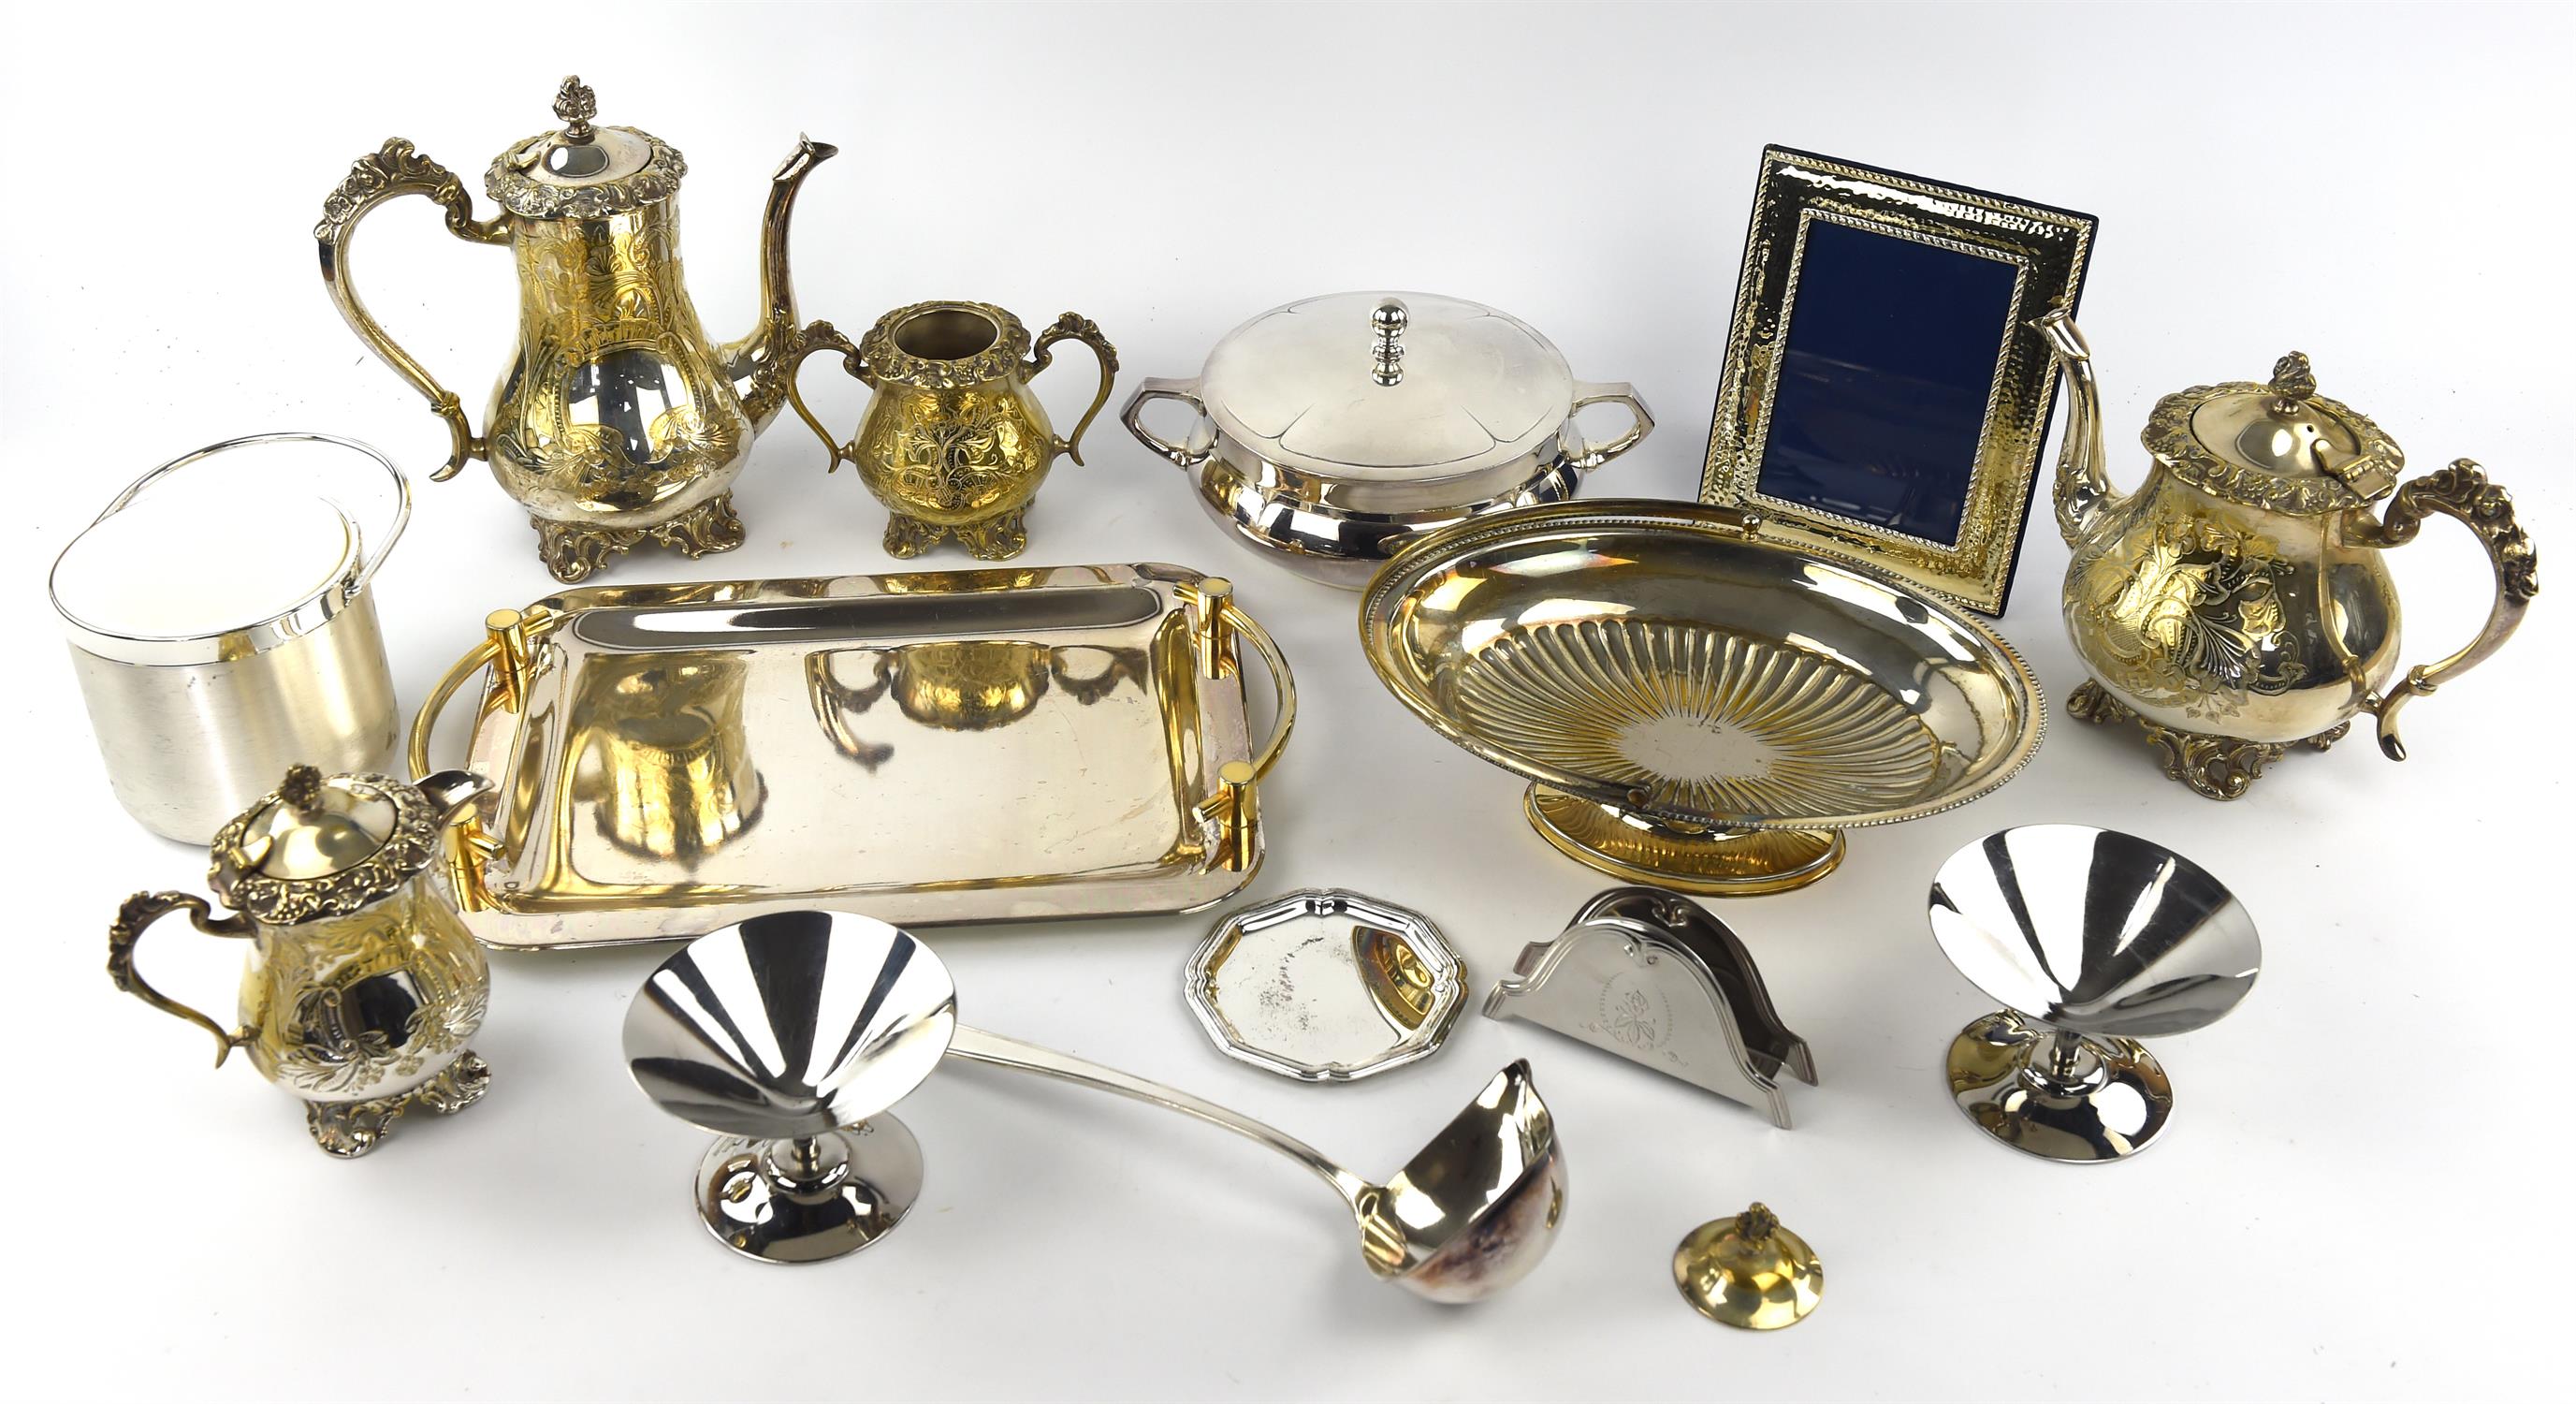 Four piece silver plated tea set and selection of plated wares (qty)